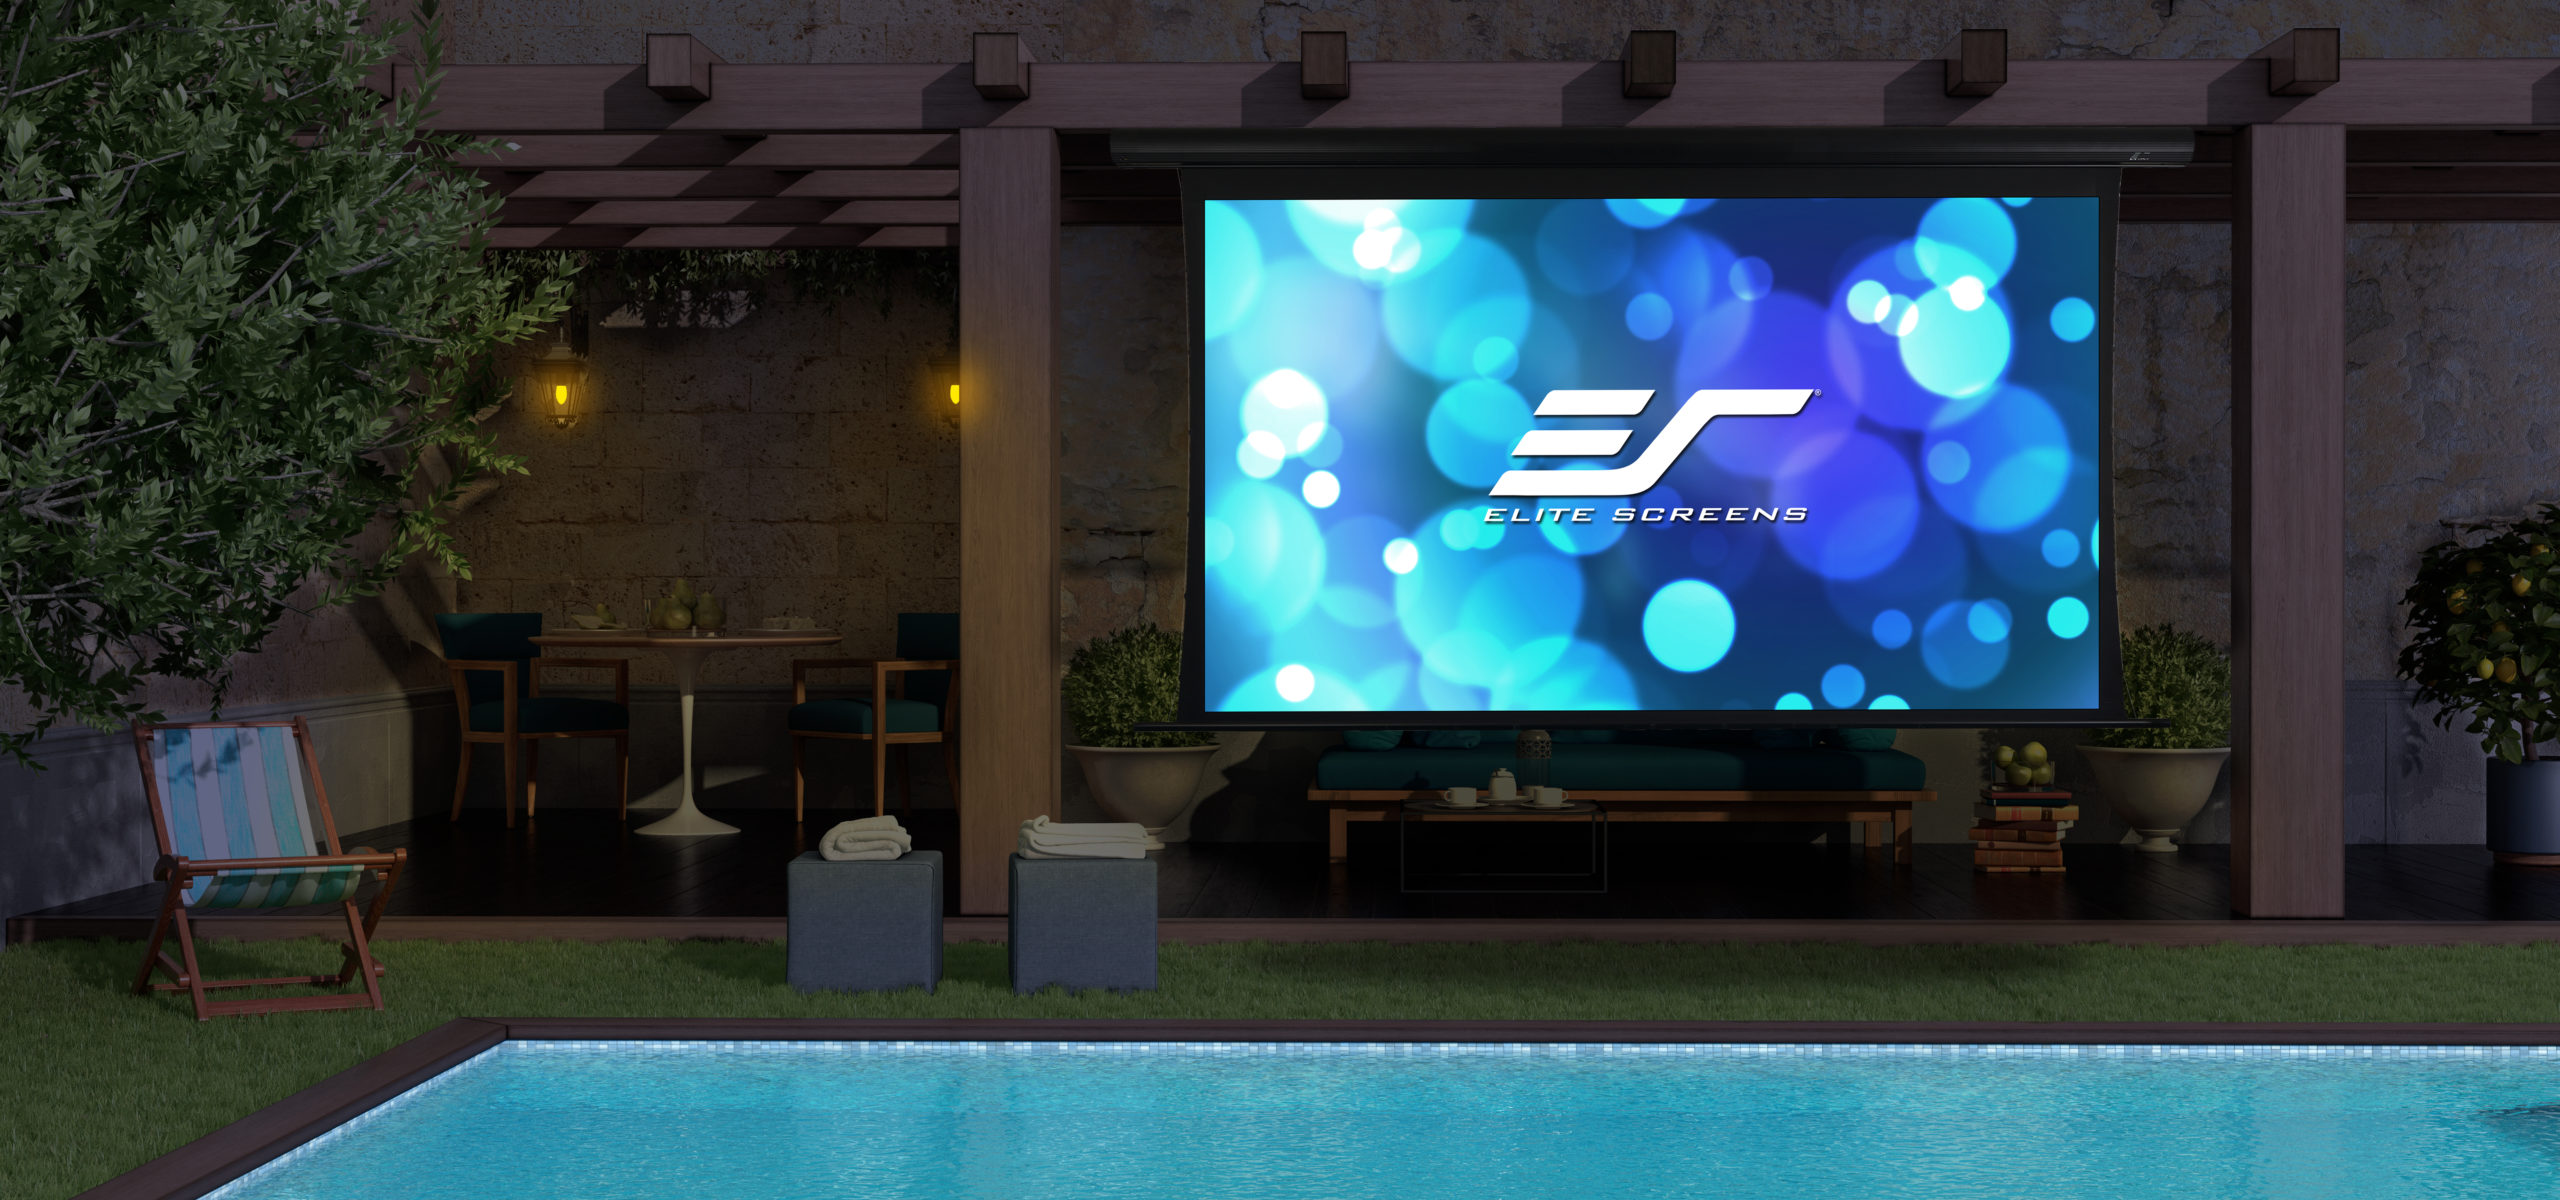 Review Elite Screens Yard Master Outdoor Projection Screen Residential Systems